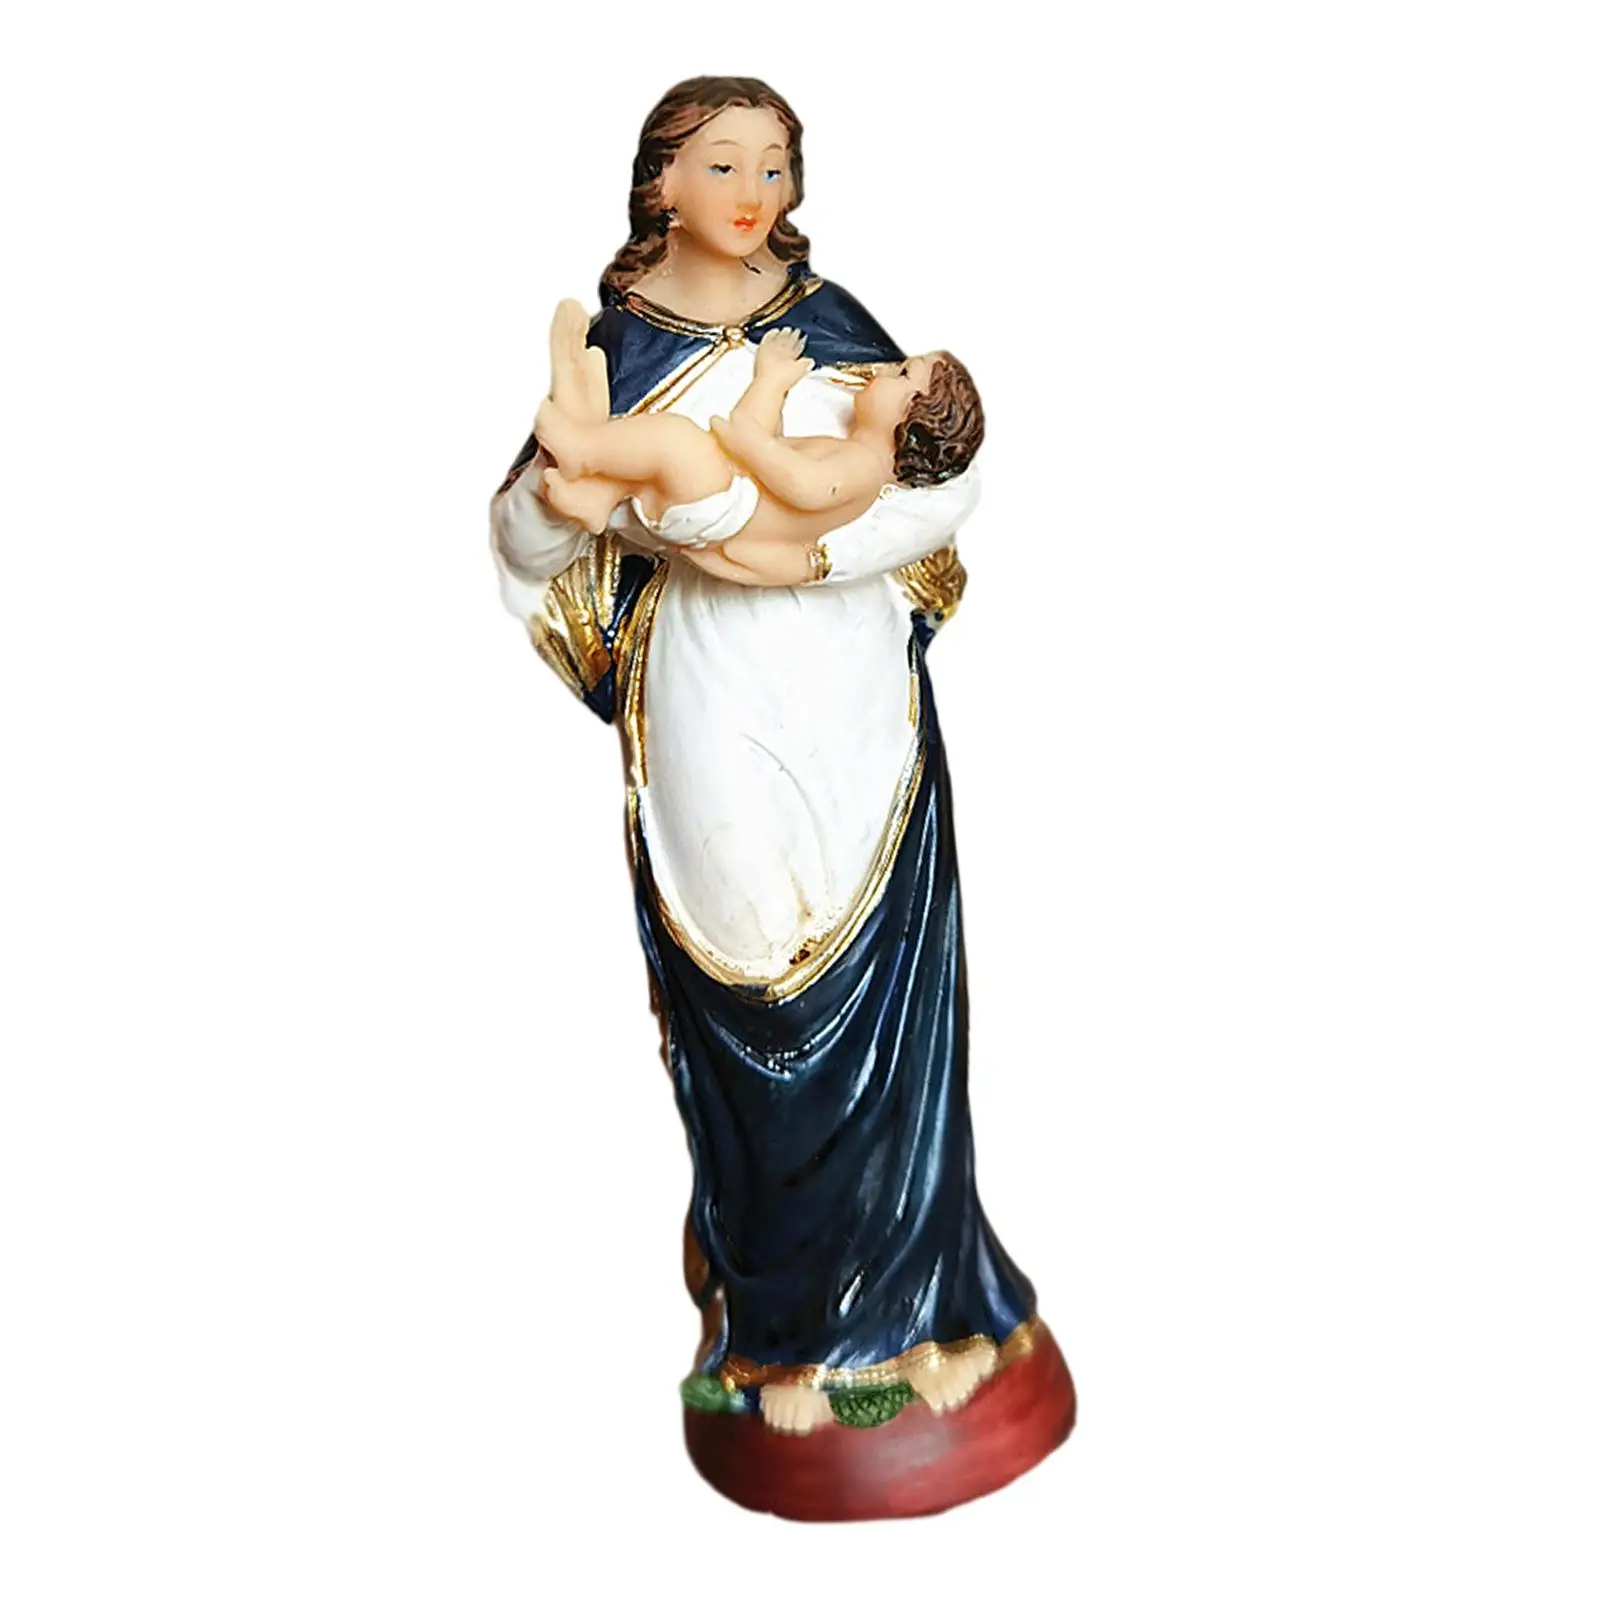 Religious Figurine Religious Figure Standing Statue Crafts Polyresin Ornament Decor Collectible Figurine for Office/ Garden